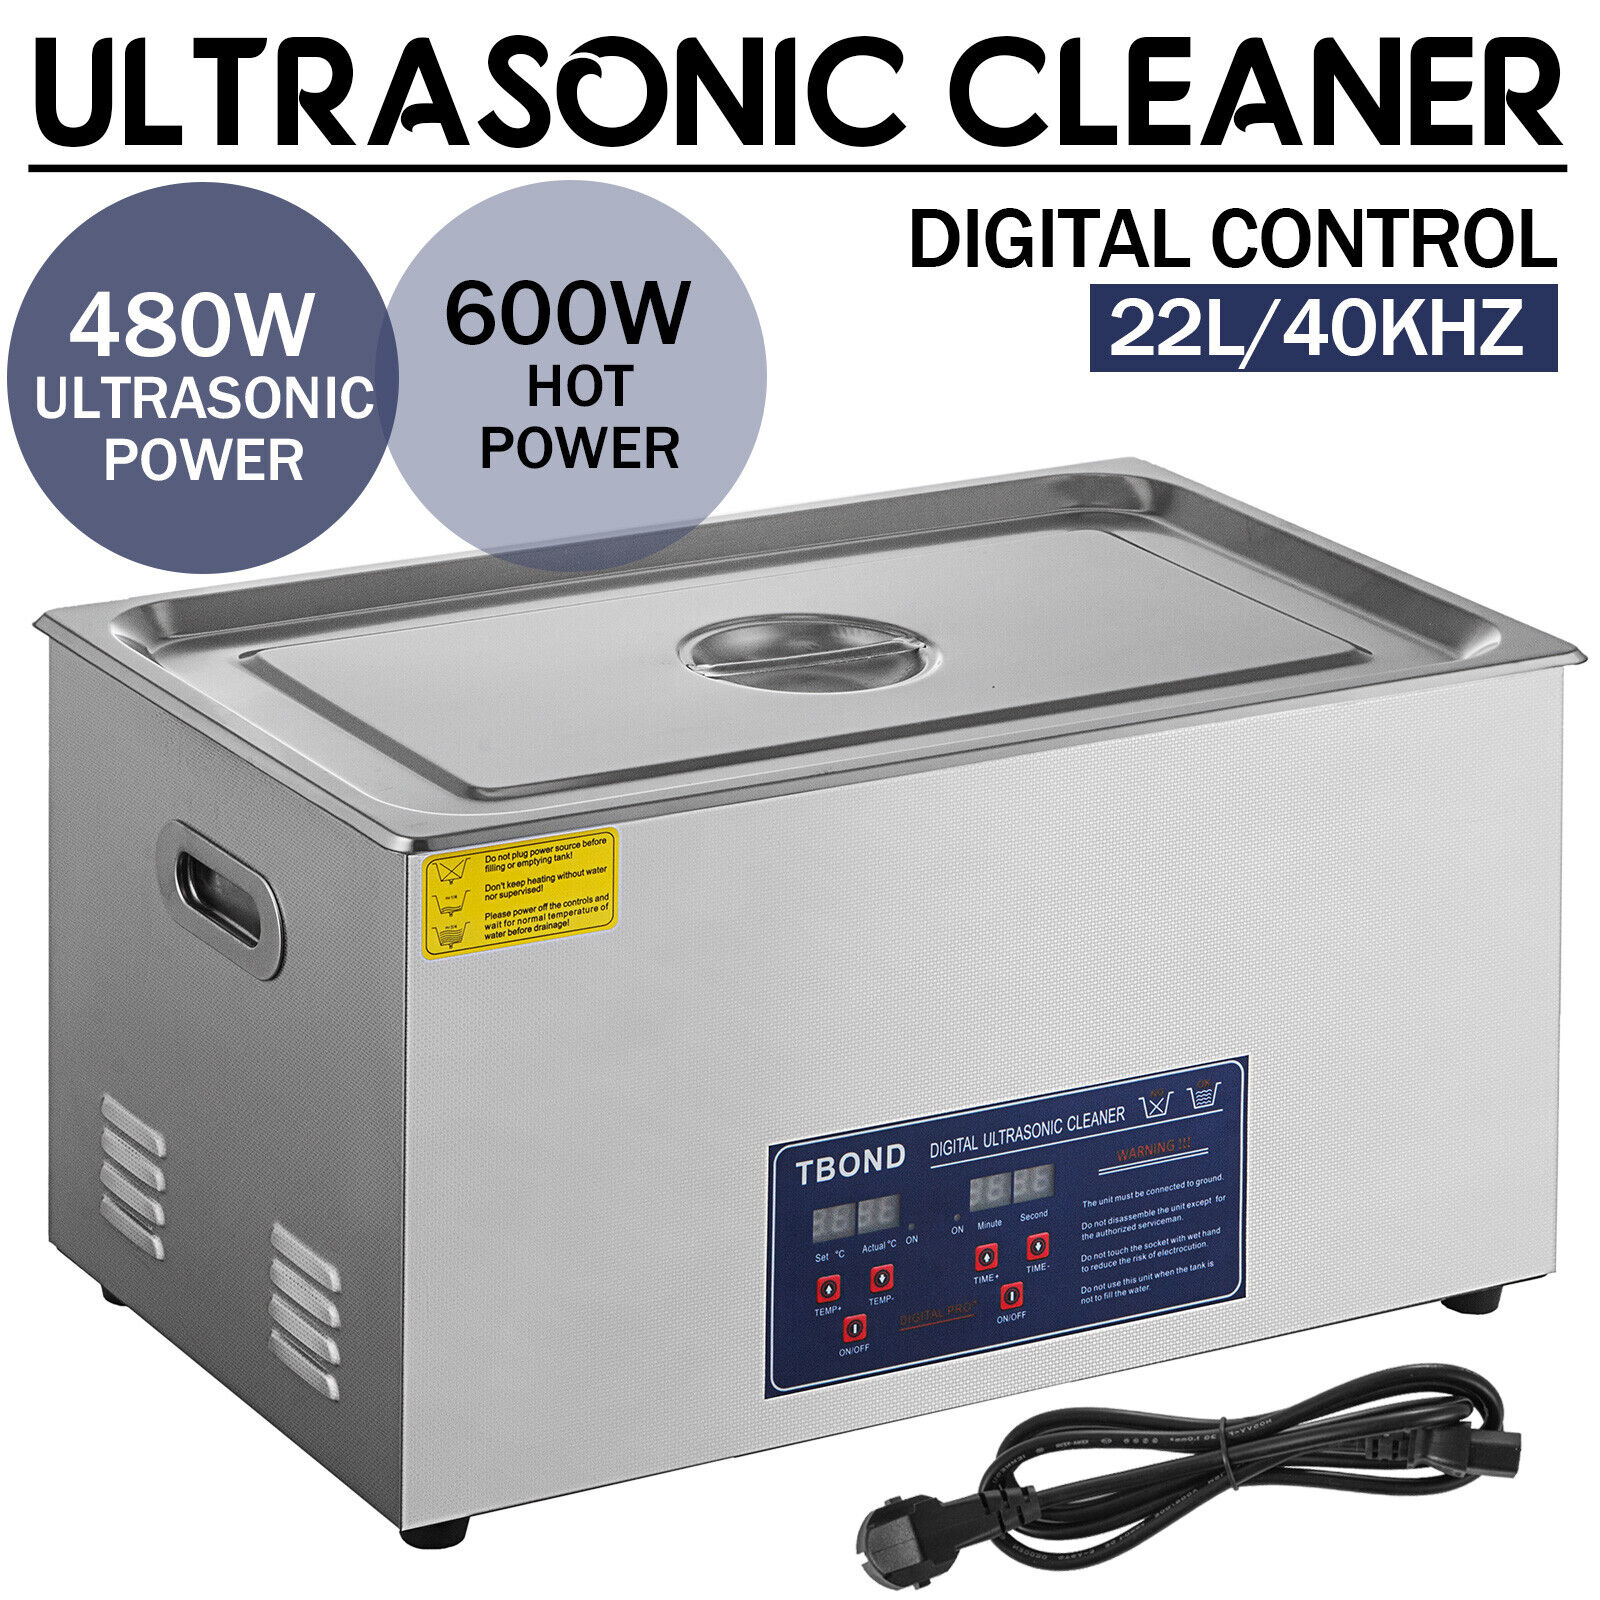 22L Ultrasonic Cleaner Cleaning Stainless Steel Industry Heated w/Timer Heater